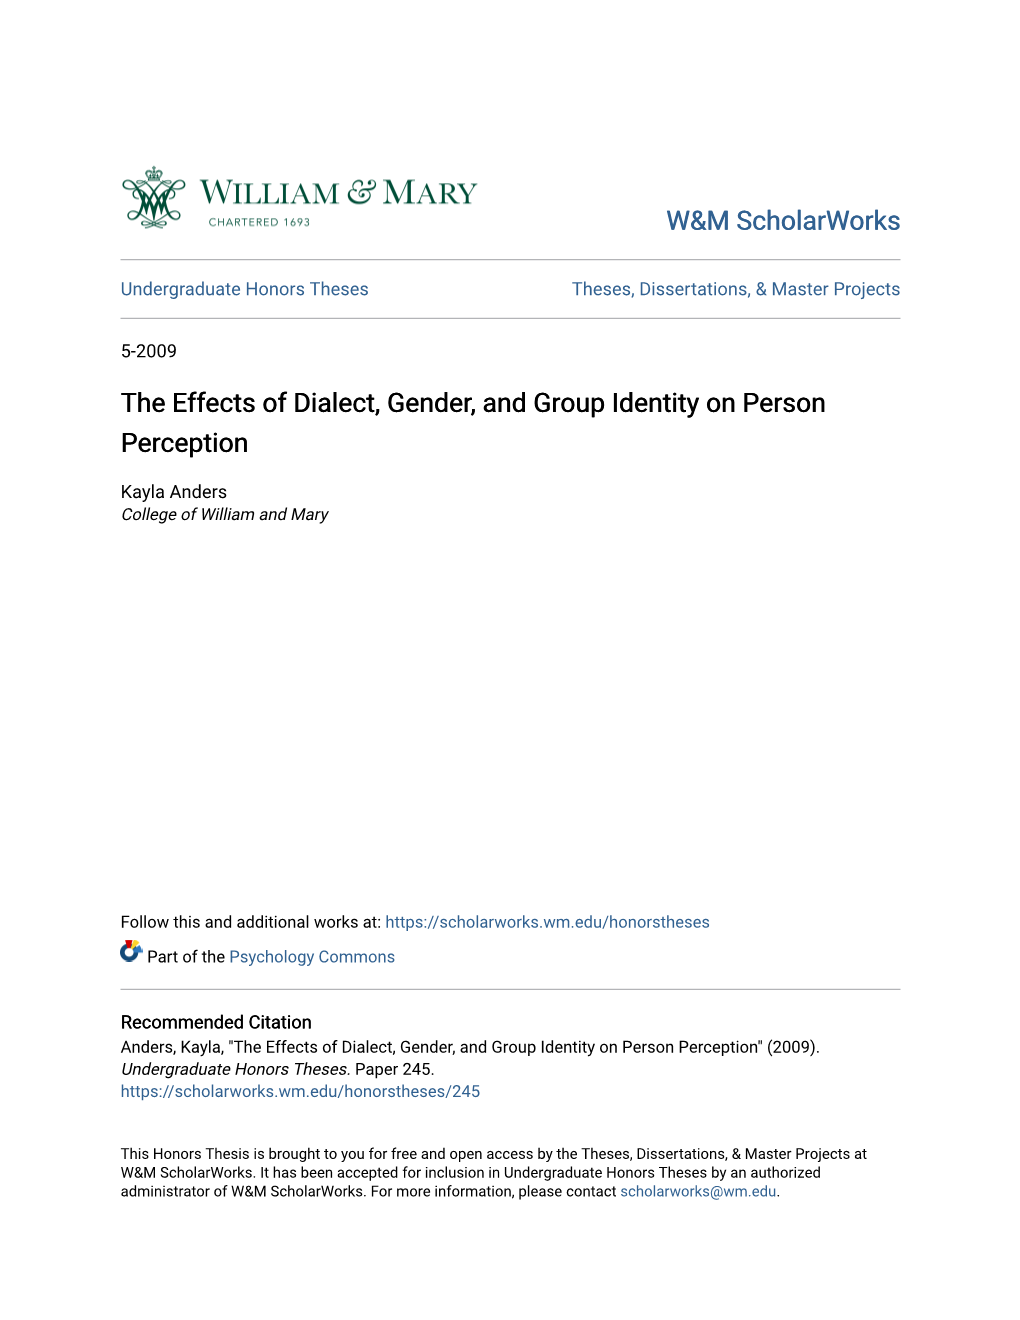 The Effects of Dialect, Gender, and Group Identity on Person Perception